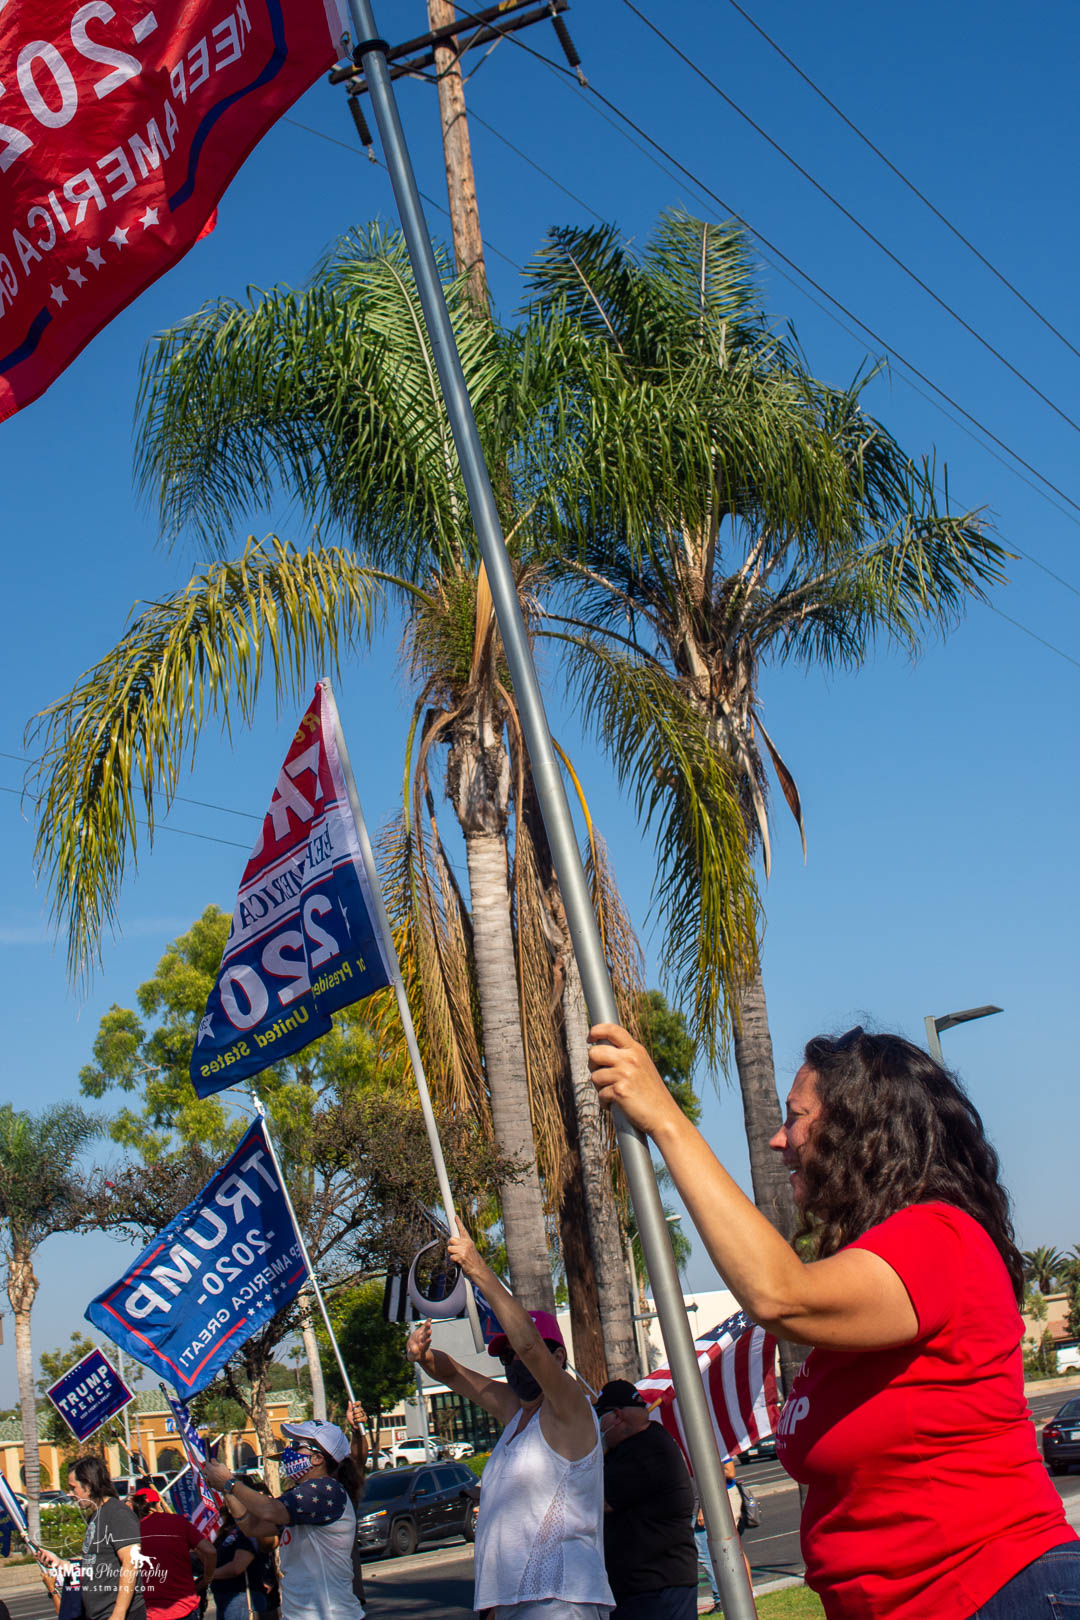 Caroline Hesse holds a pole with a Trump 2020 flag in support of the president at a Rally she and her boyfriend, Steven co-organized on Sunday, October 18, 2020 in La Habra, California. 